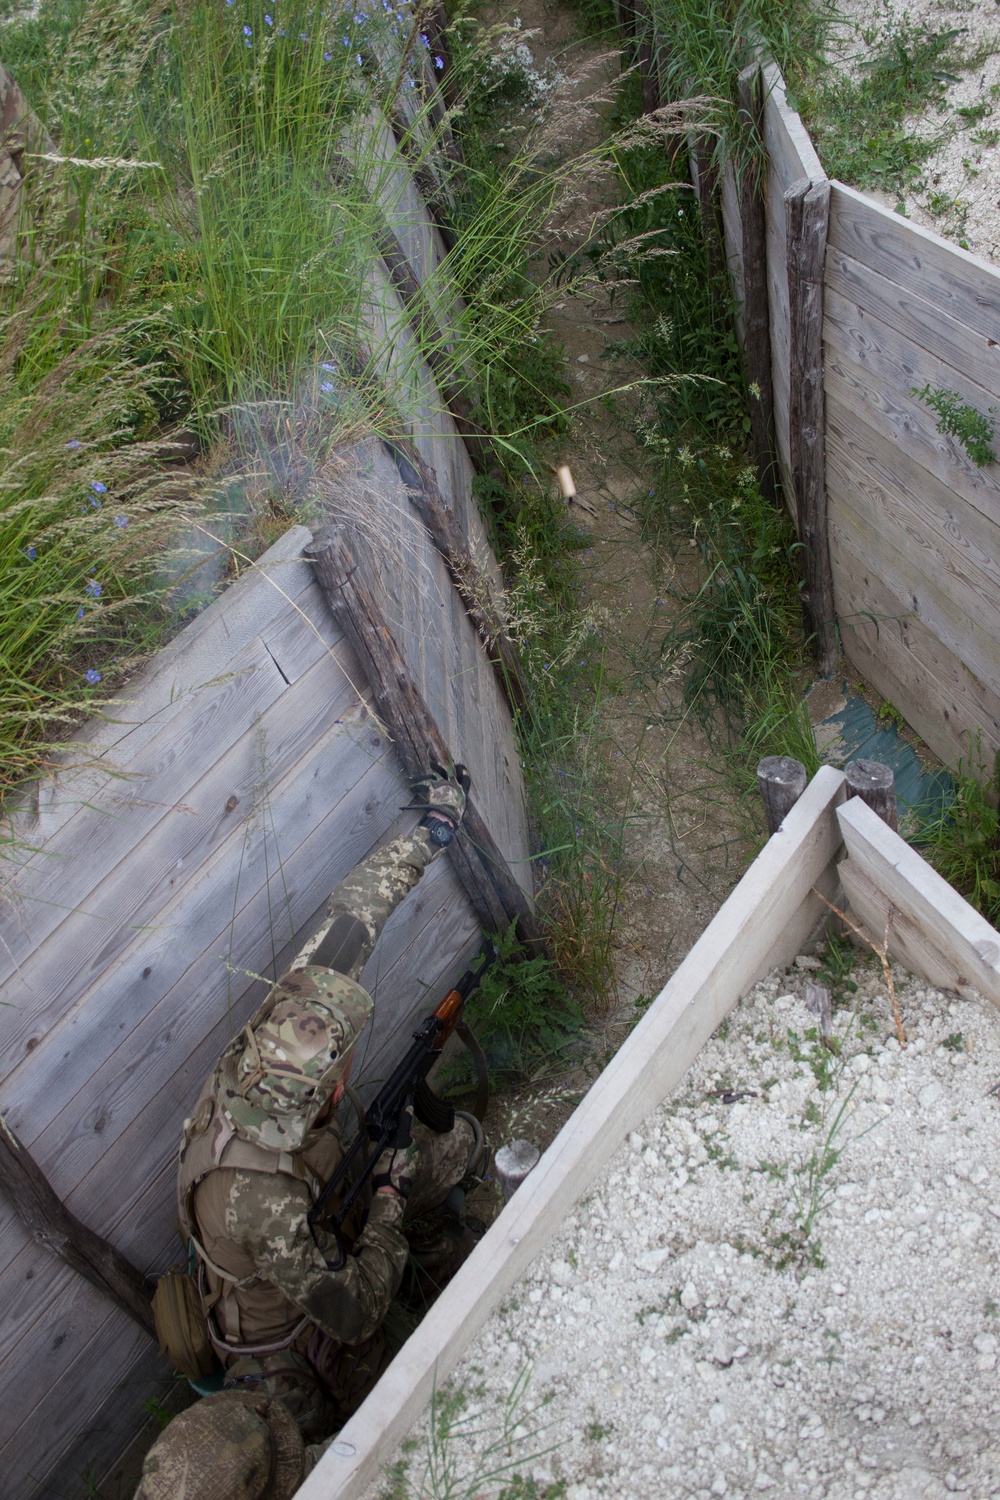 Trench clearance training in Ukraine